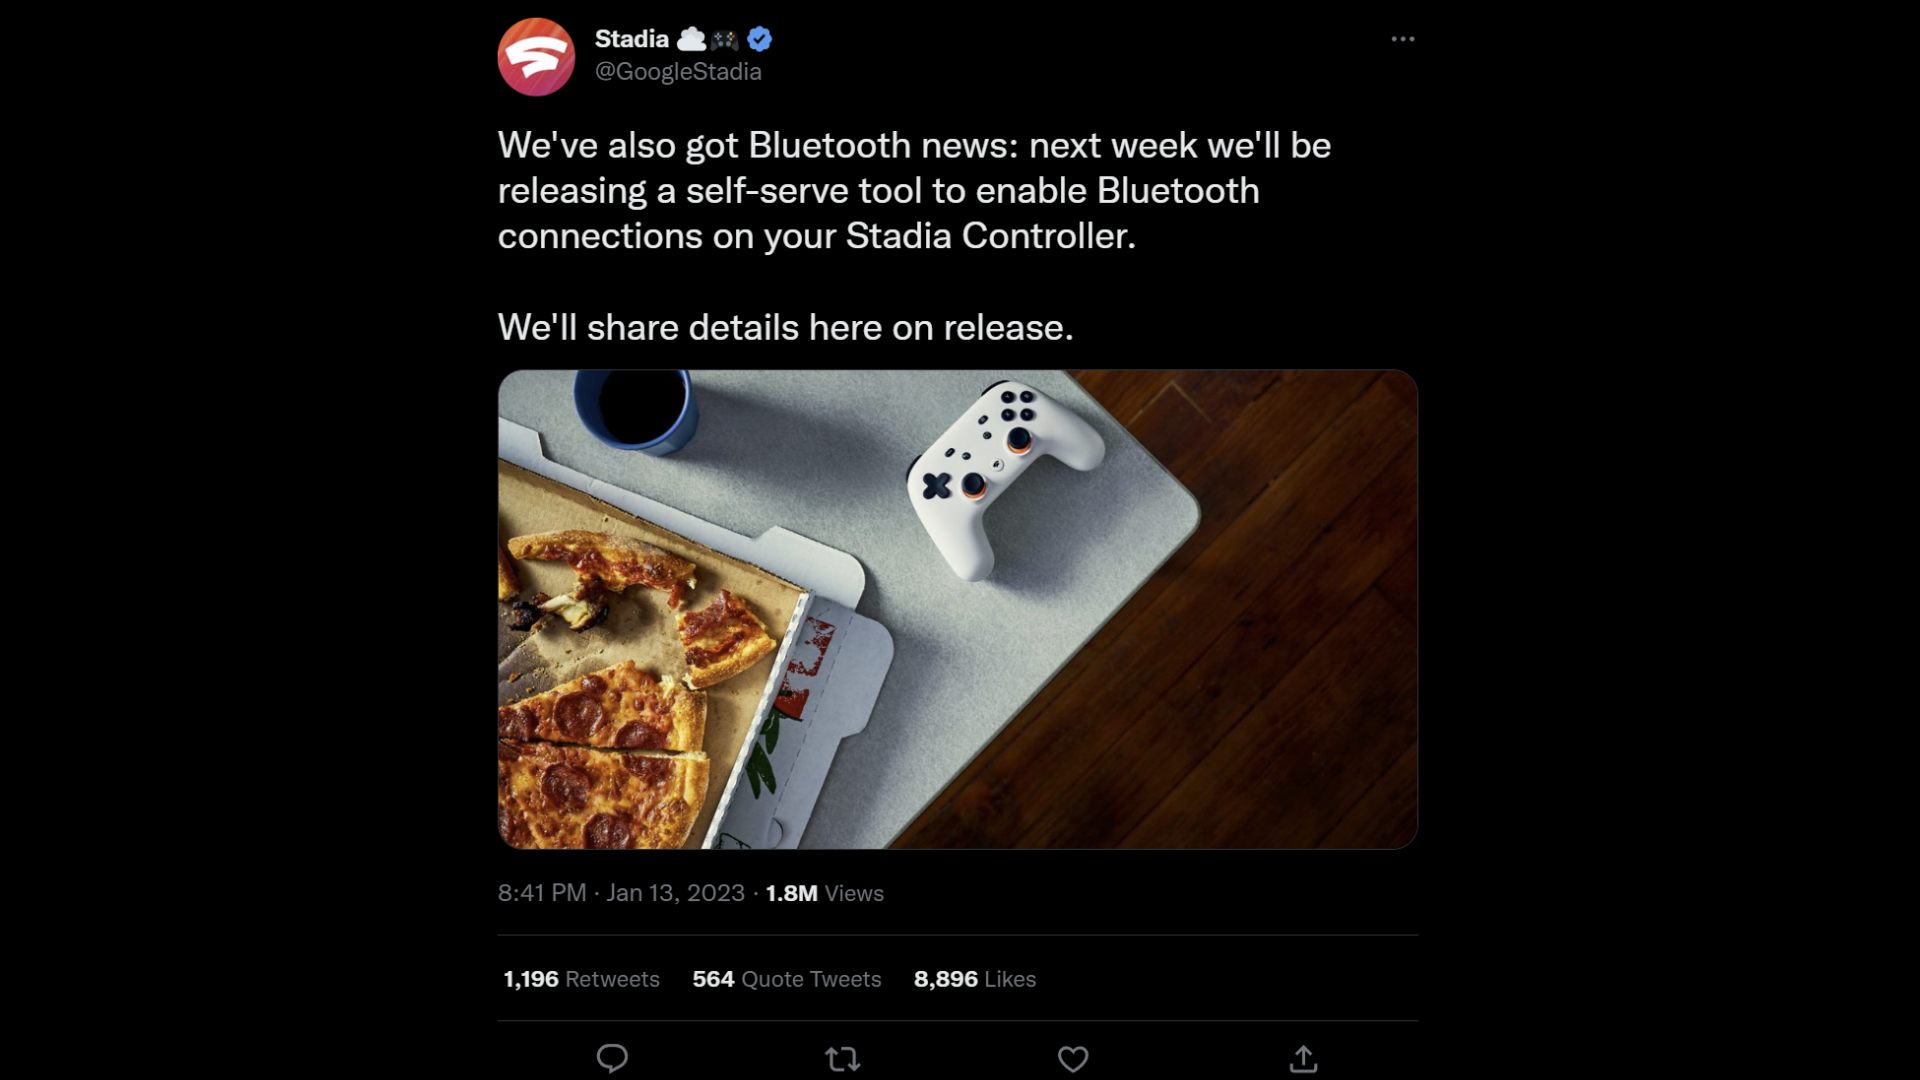 Tweet from Google Stadia account announcing bluetooth controller update